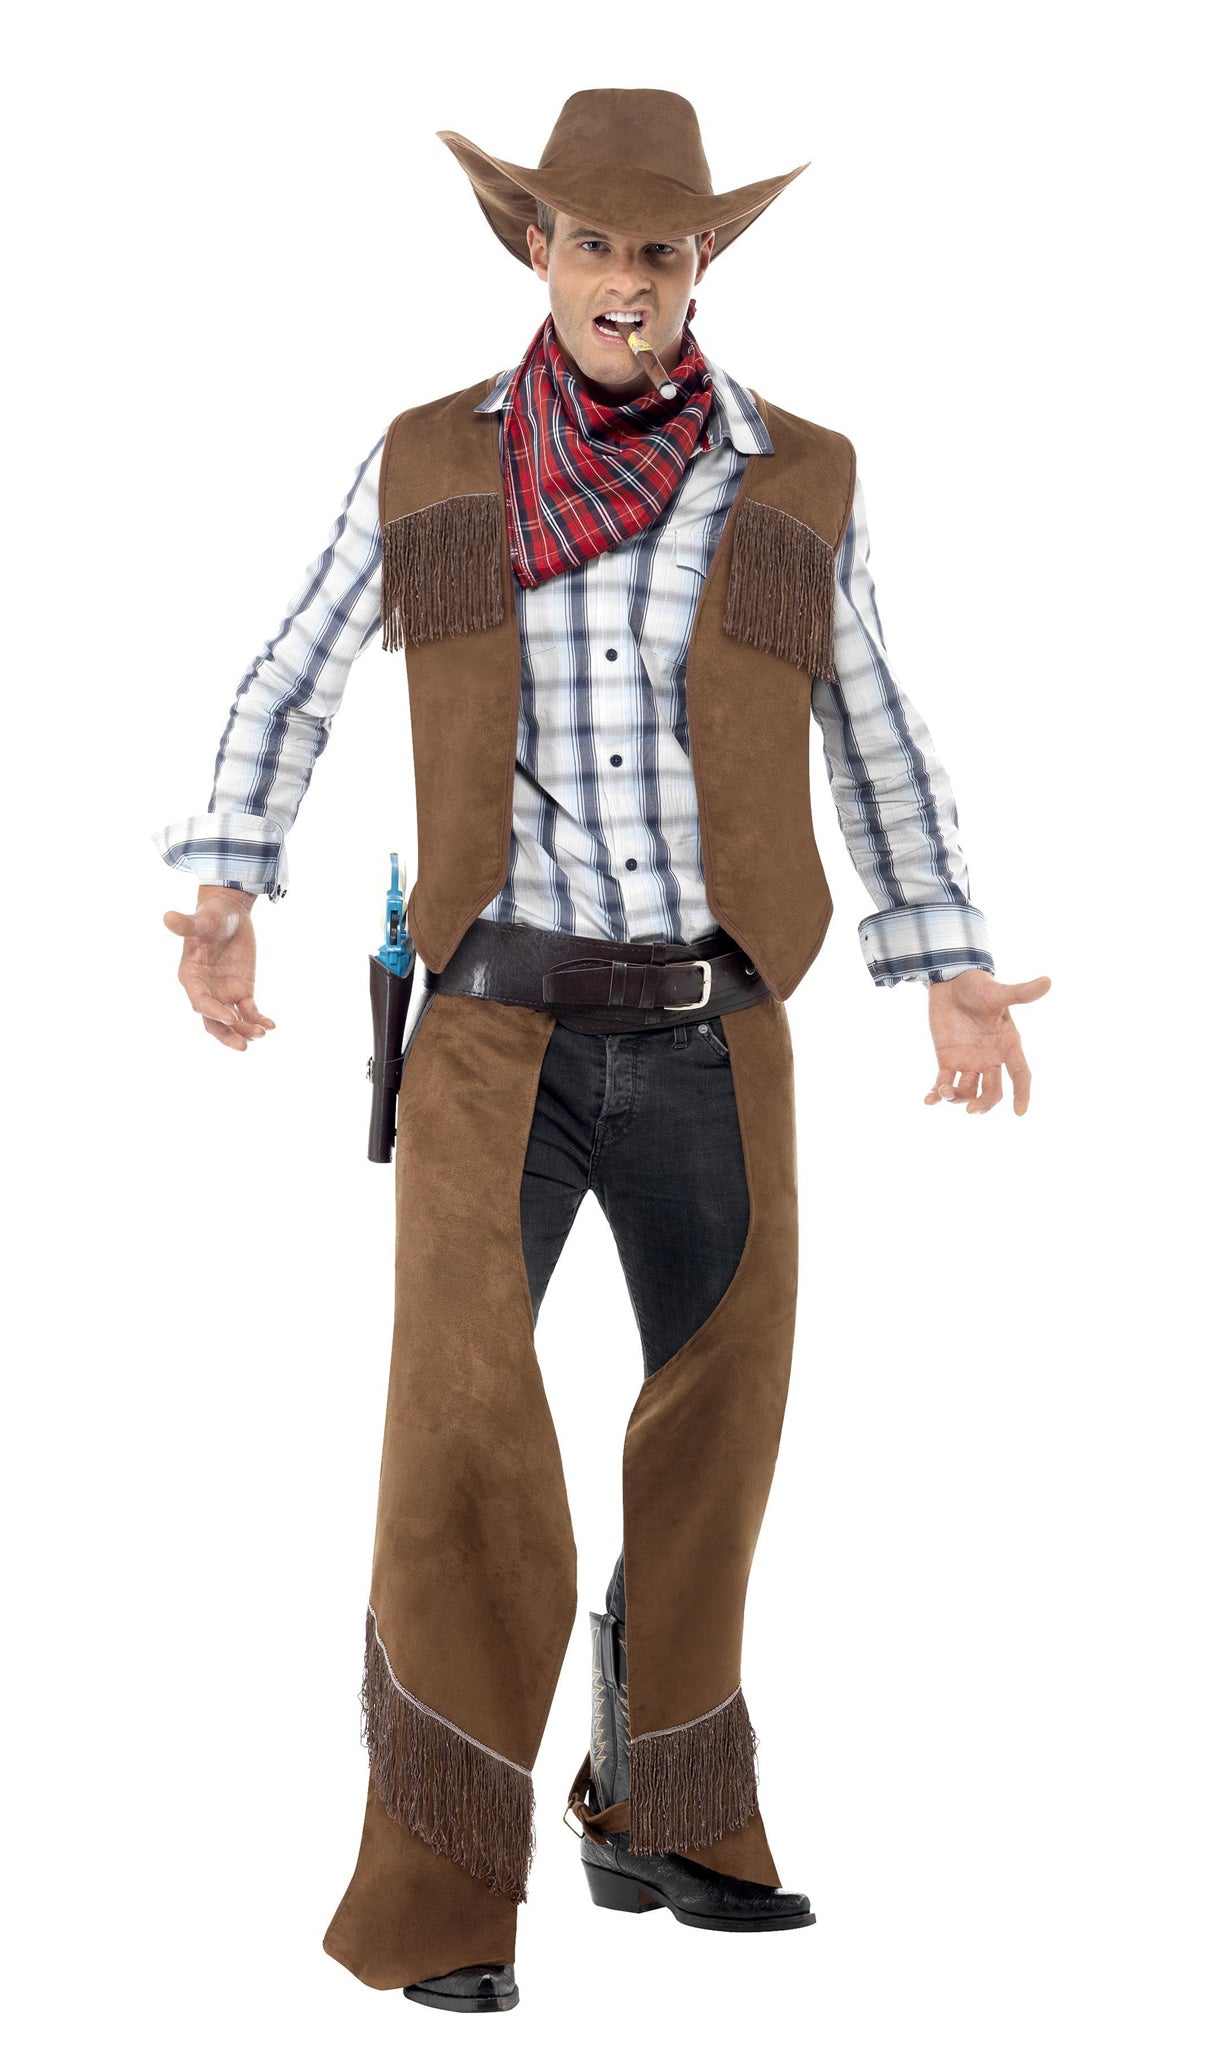 Cowboy costume in brown with chaps, waist coat, hat and scarf